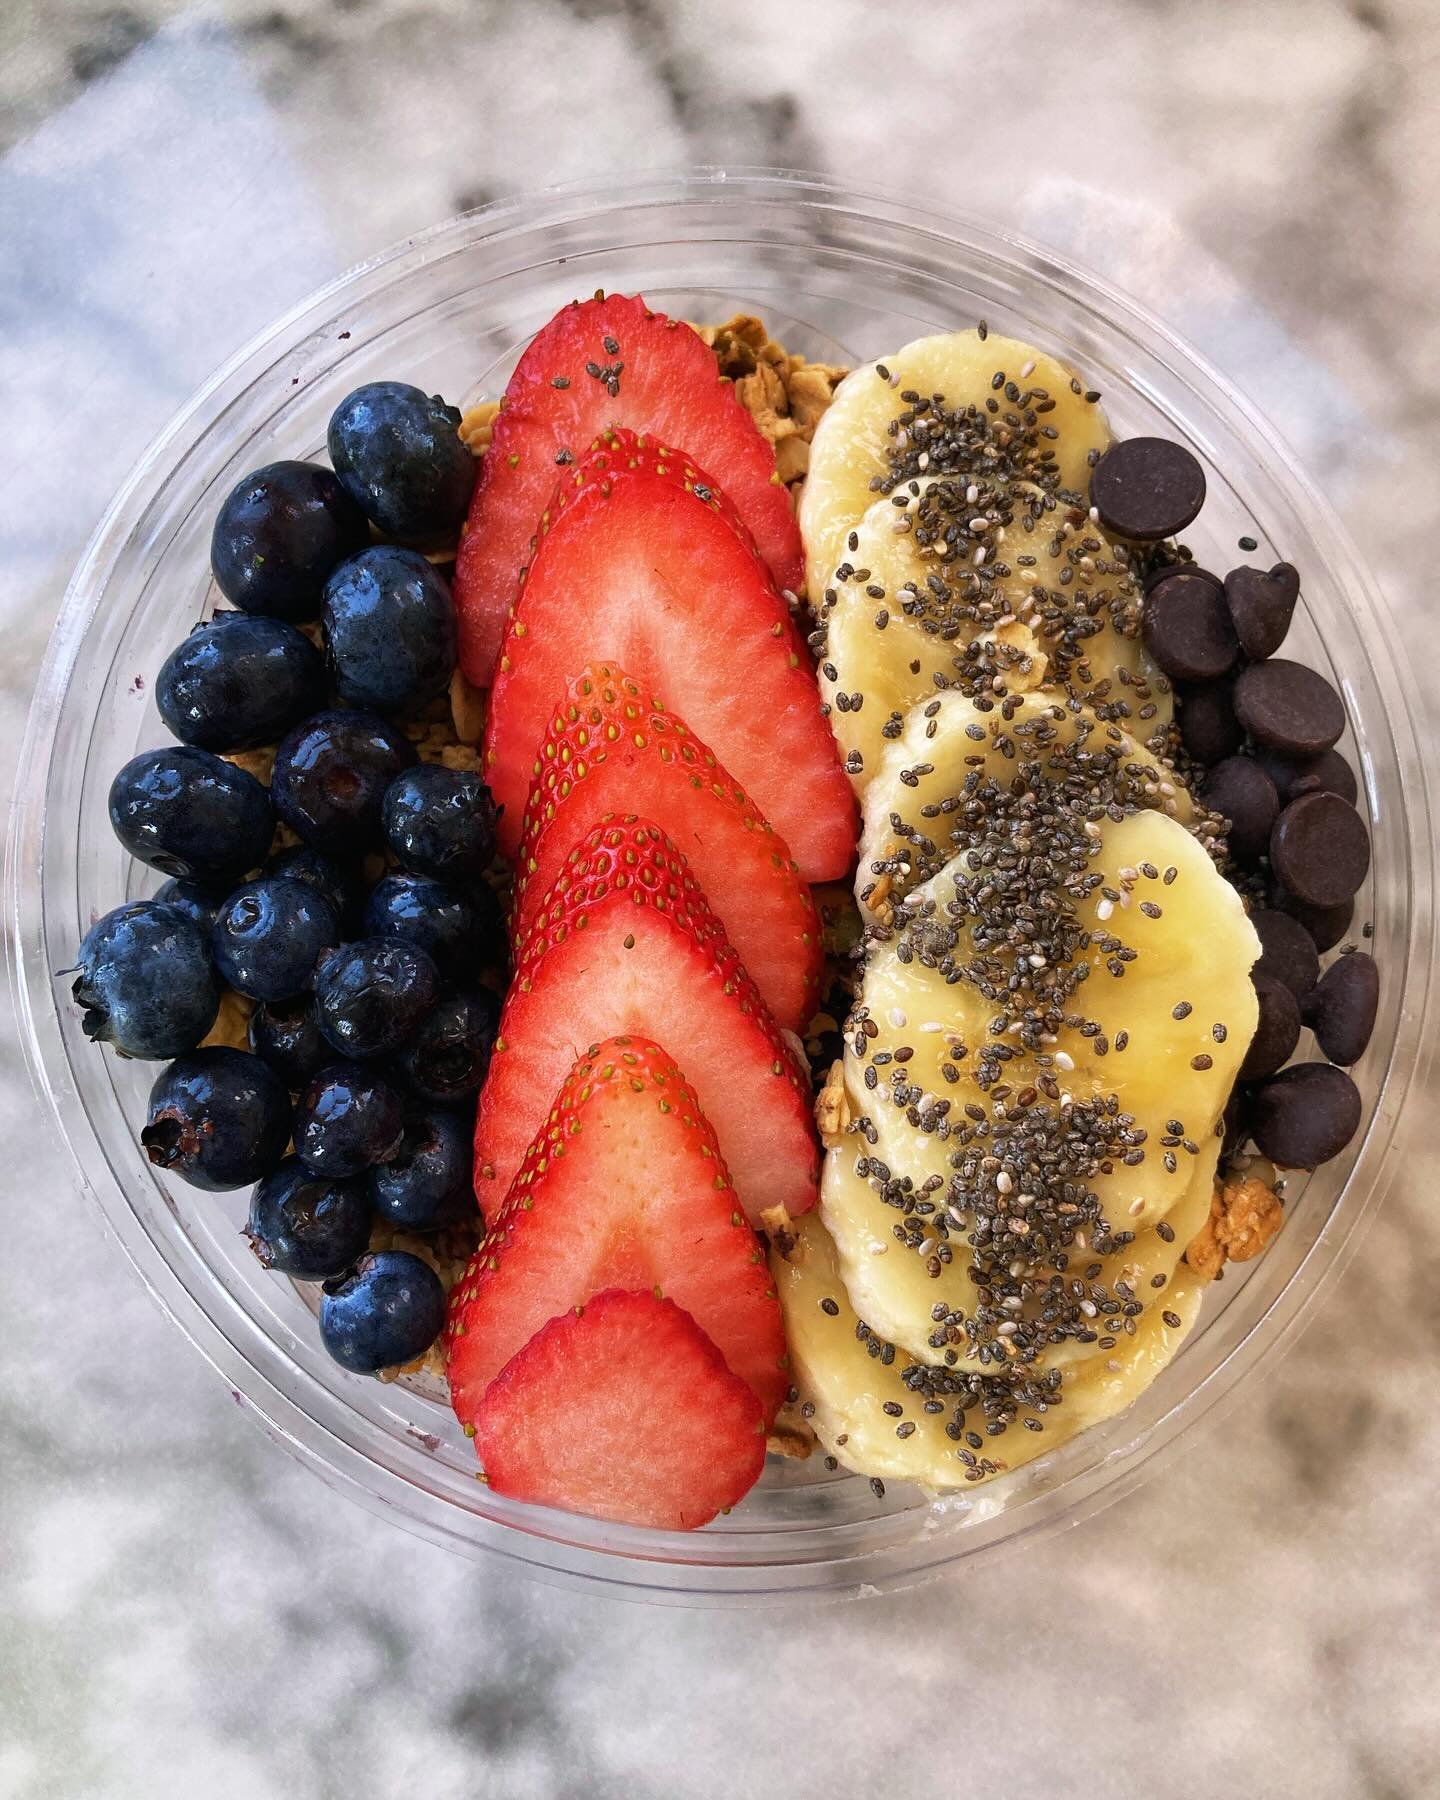 Our Berry Enlightened Acai Bowl is packed with antioxidant rich Blueberries 🫐, fresh Strawberries 🍓, Bananas 🍌, granola and Chia Seeds. We add a few chocolate chips to sweeten things up a bit ☺️ 

Visit us for breakfast, lunch or brunch ☀️😍 The T